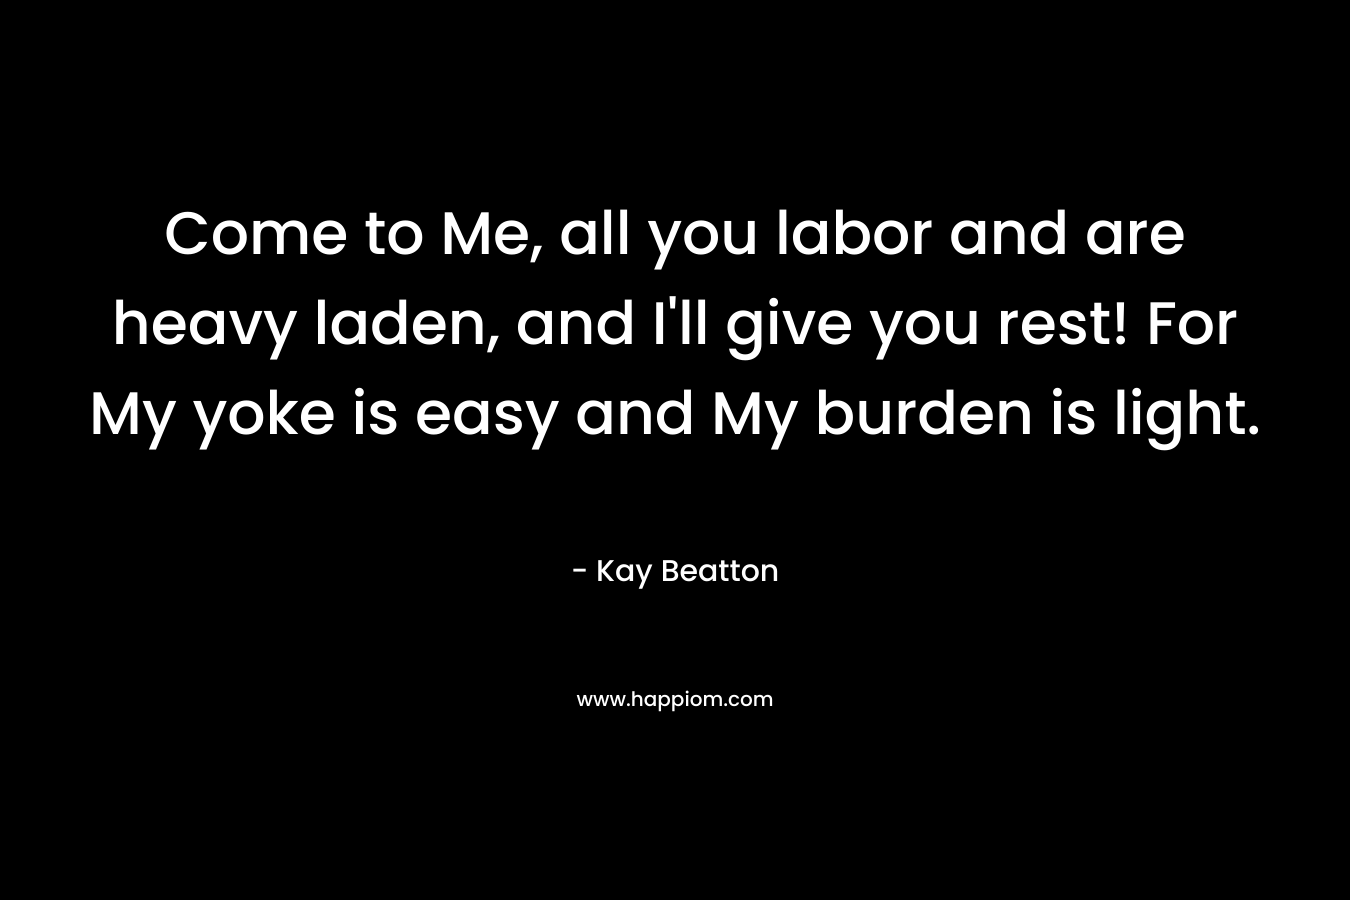 Come to Me, all you labor and are heavy laden, and I'll give you rest! For My yoke is easy and My burden is light.